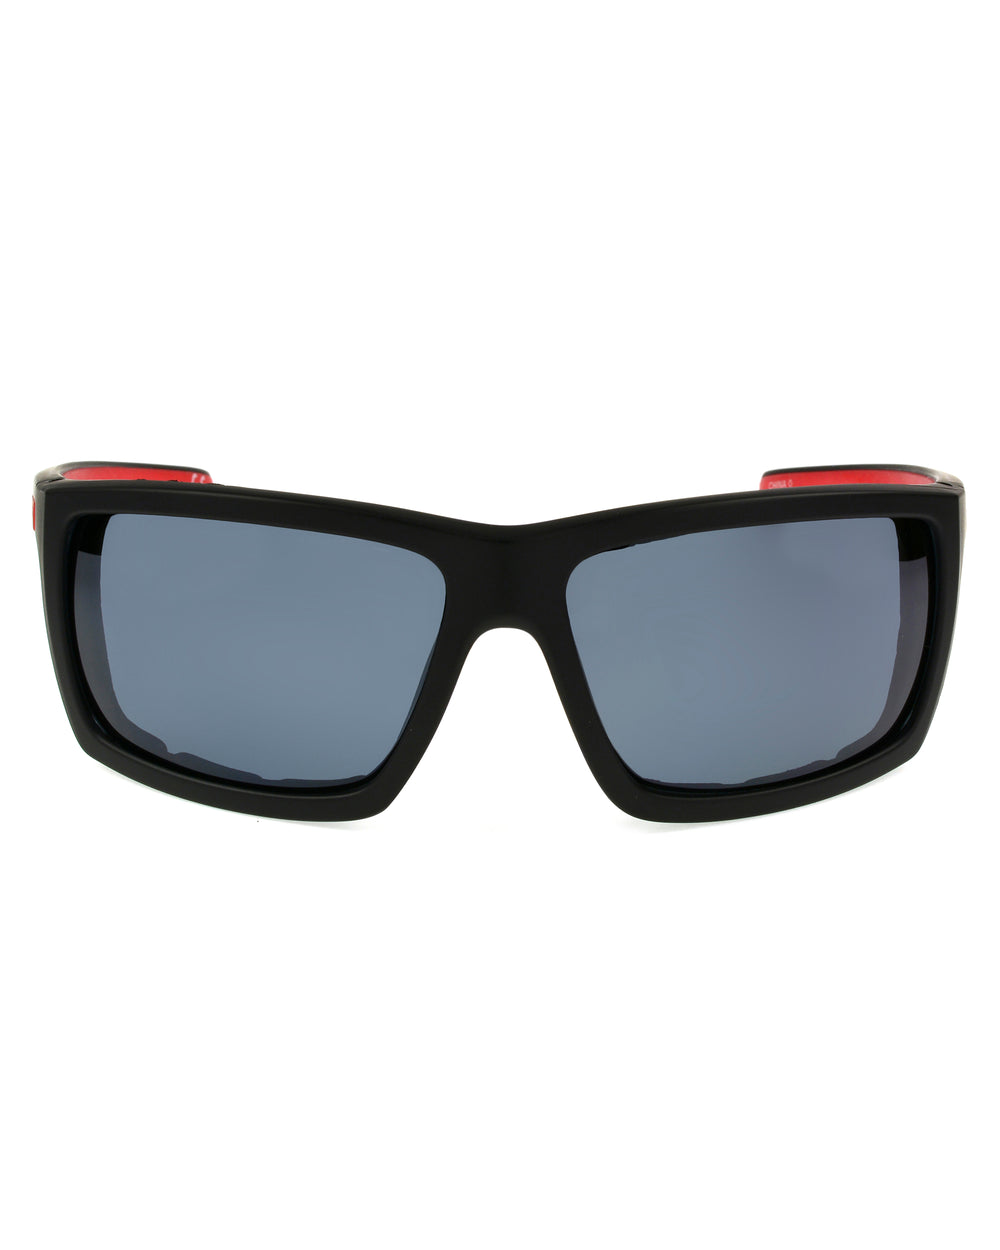 Sport Black with Red Accent Polarized Sunglasses